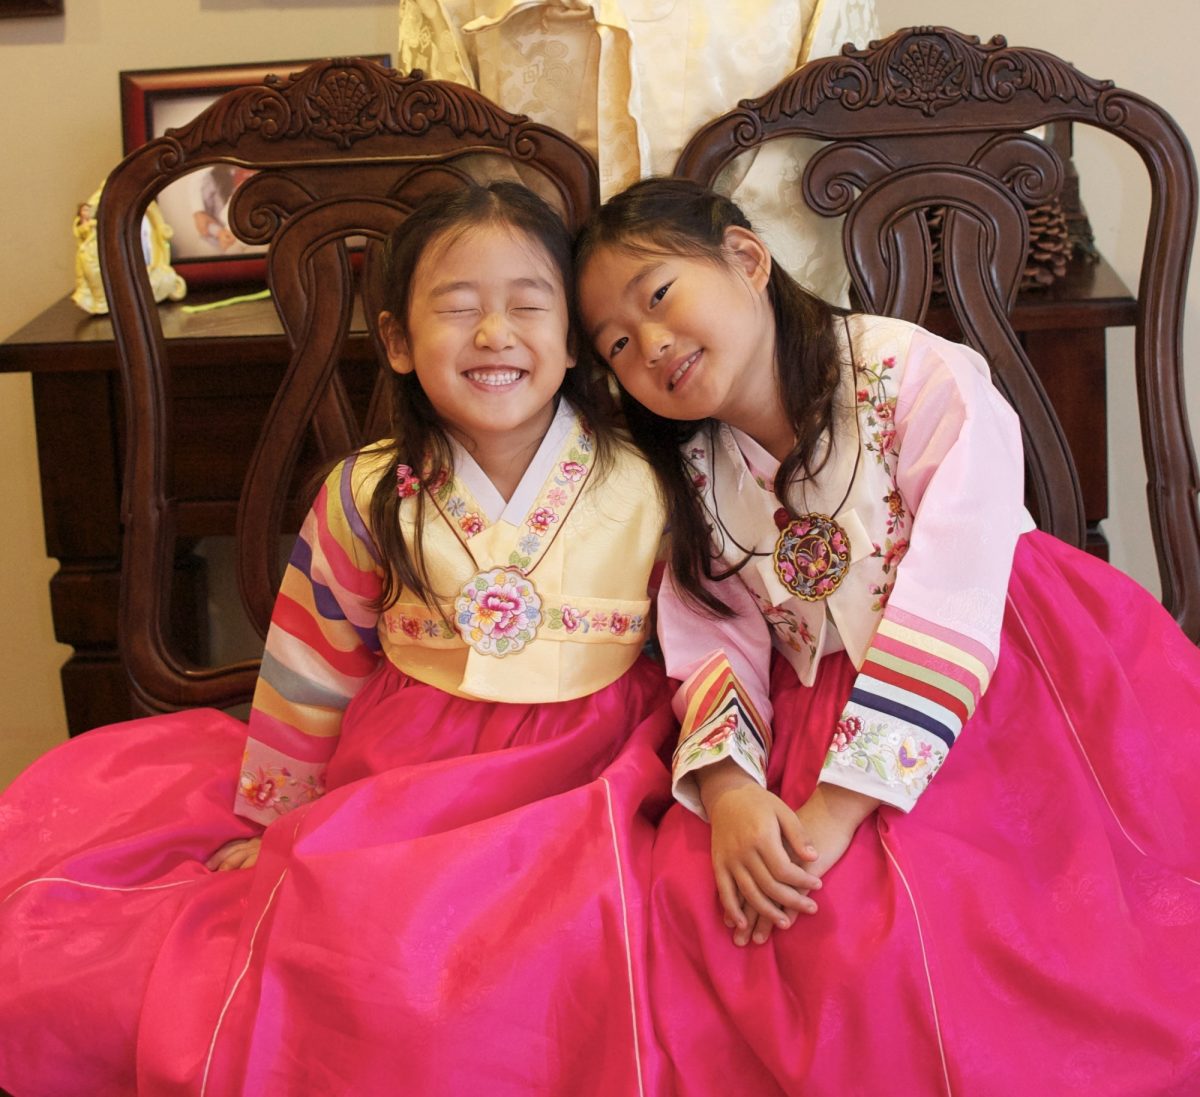 Dressed in vibrant hanbok dresses, my sister and I celebrate Seollal, the Korean New Year. We embrace our shared heritage through sisterly joy.